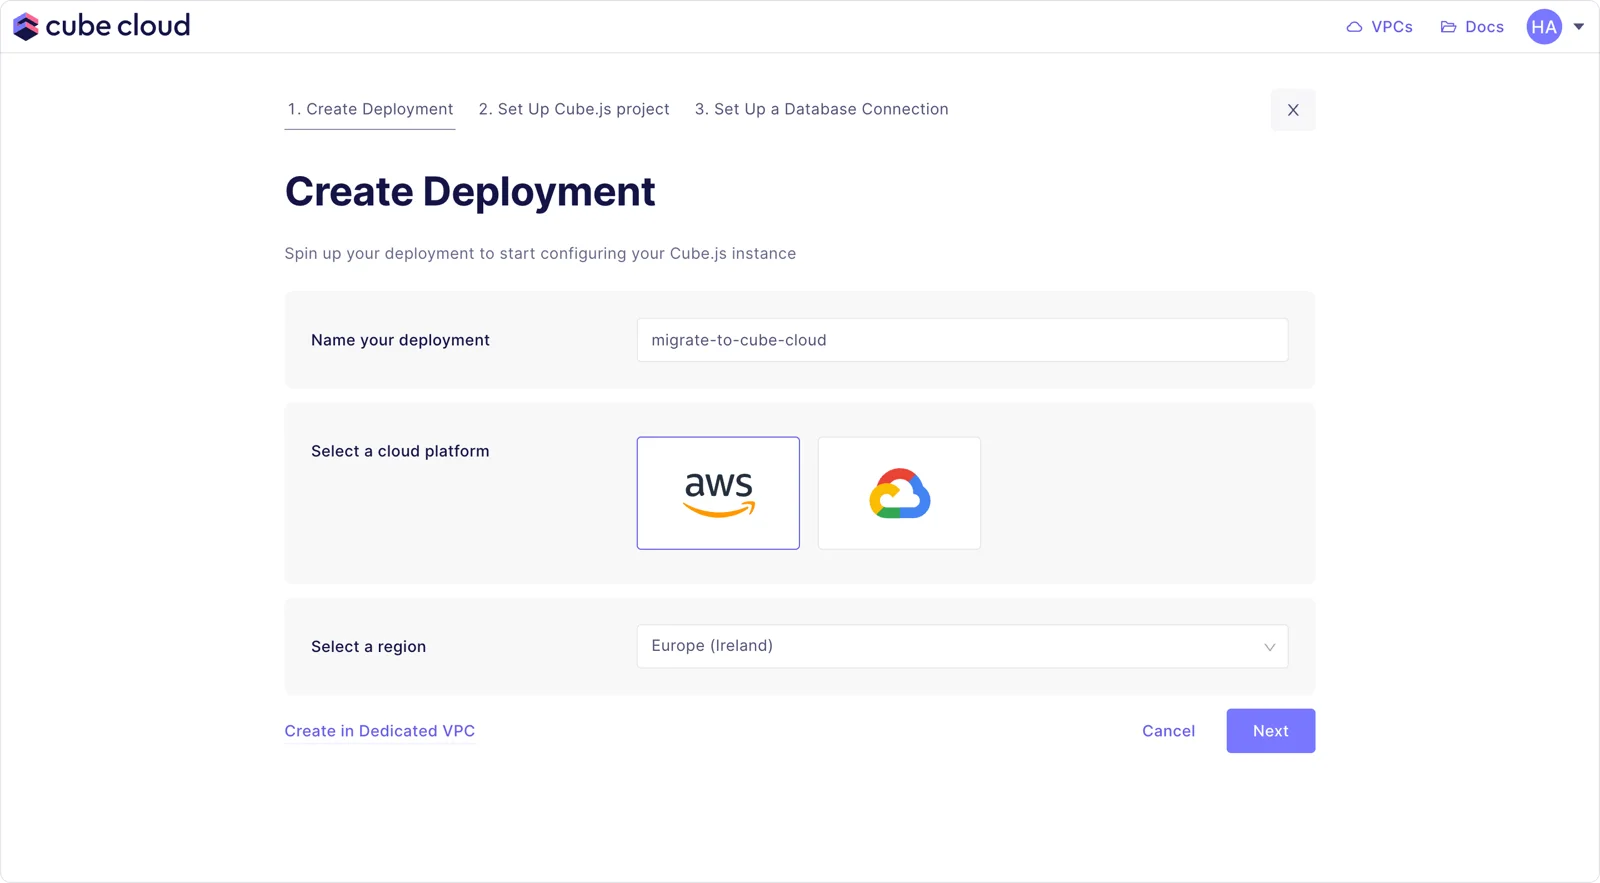 Creating a new deployment on Cube Cloud